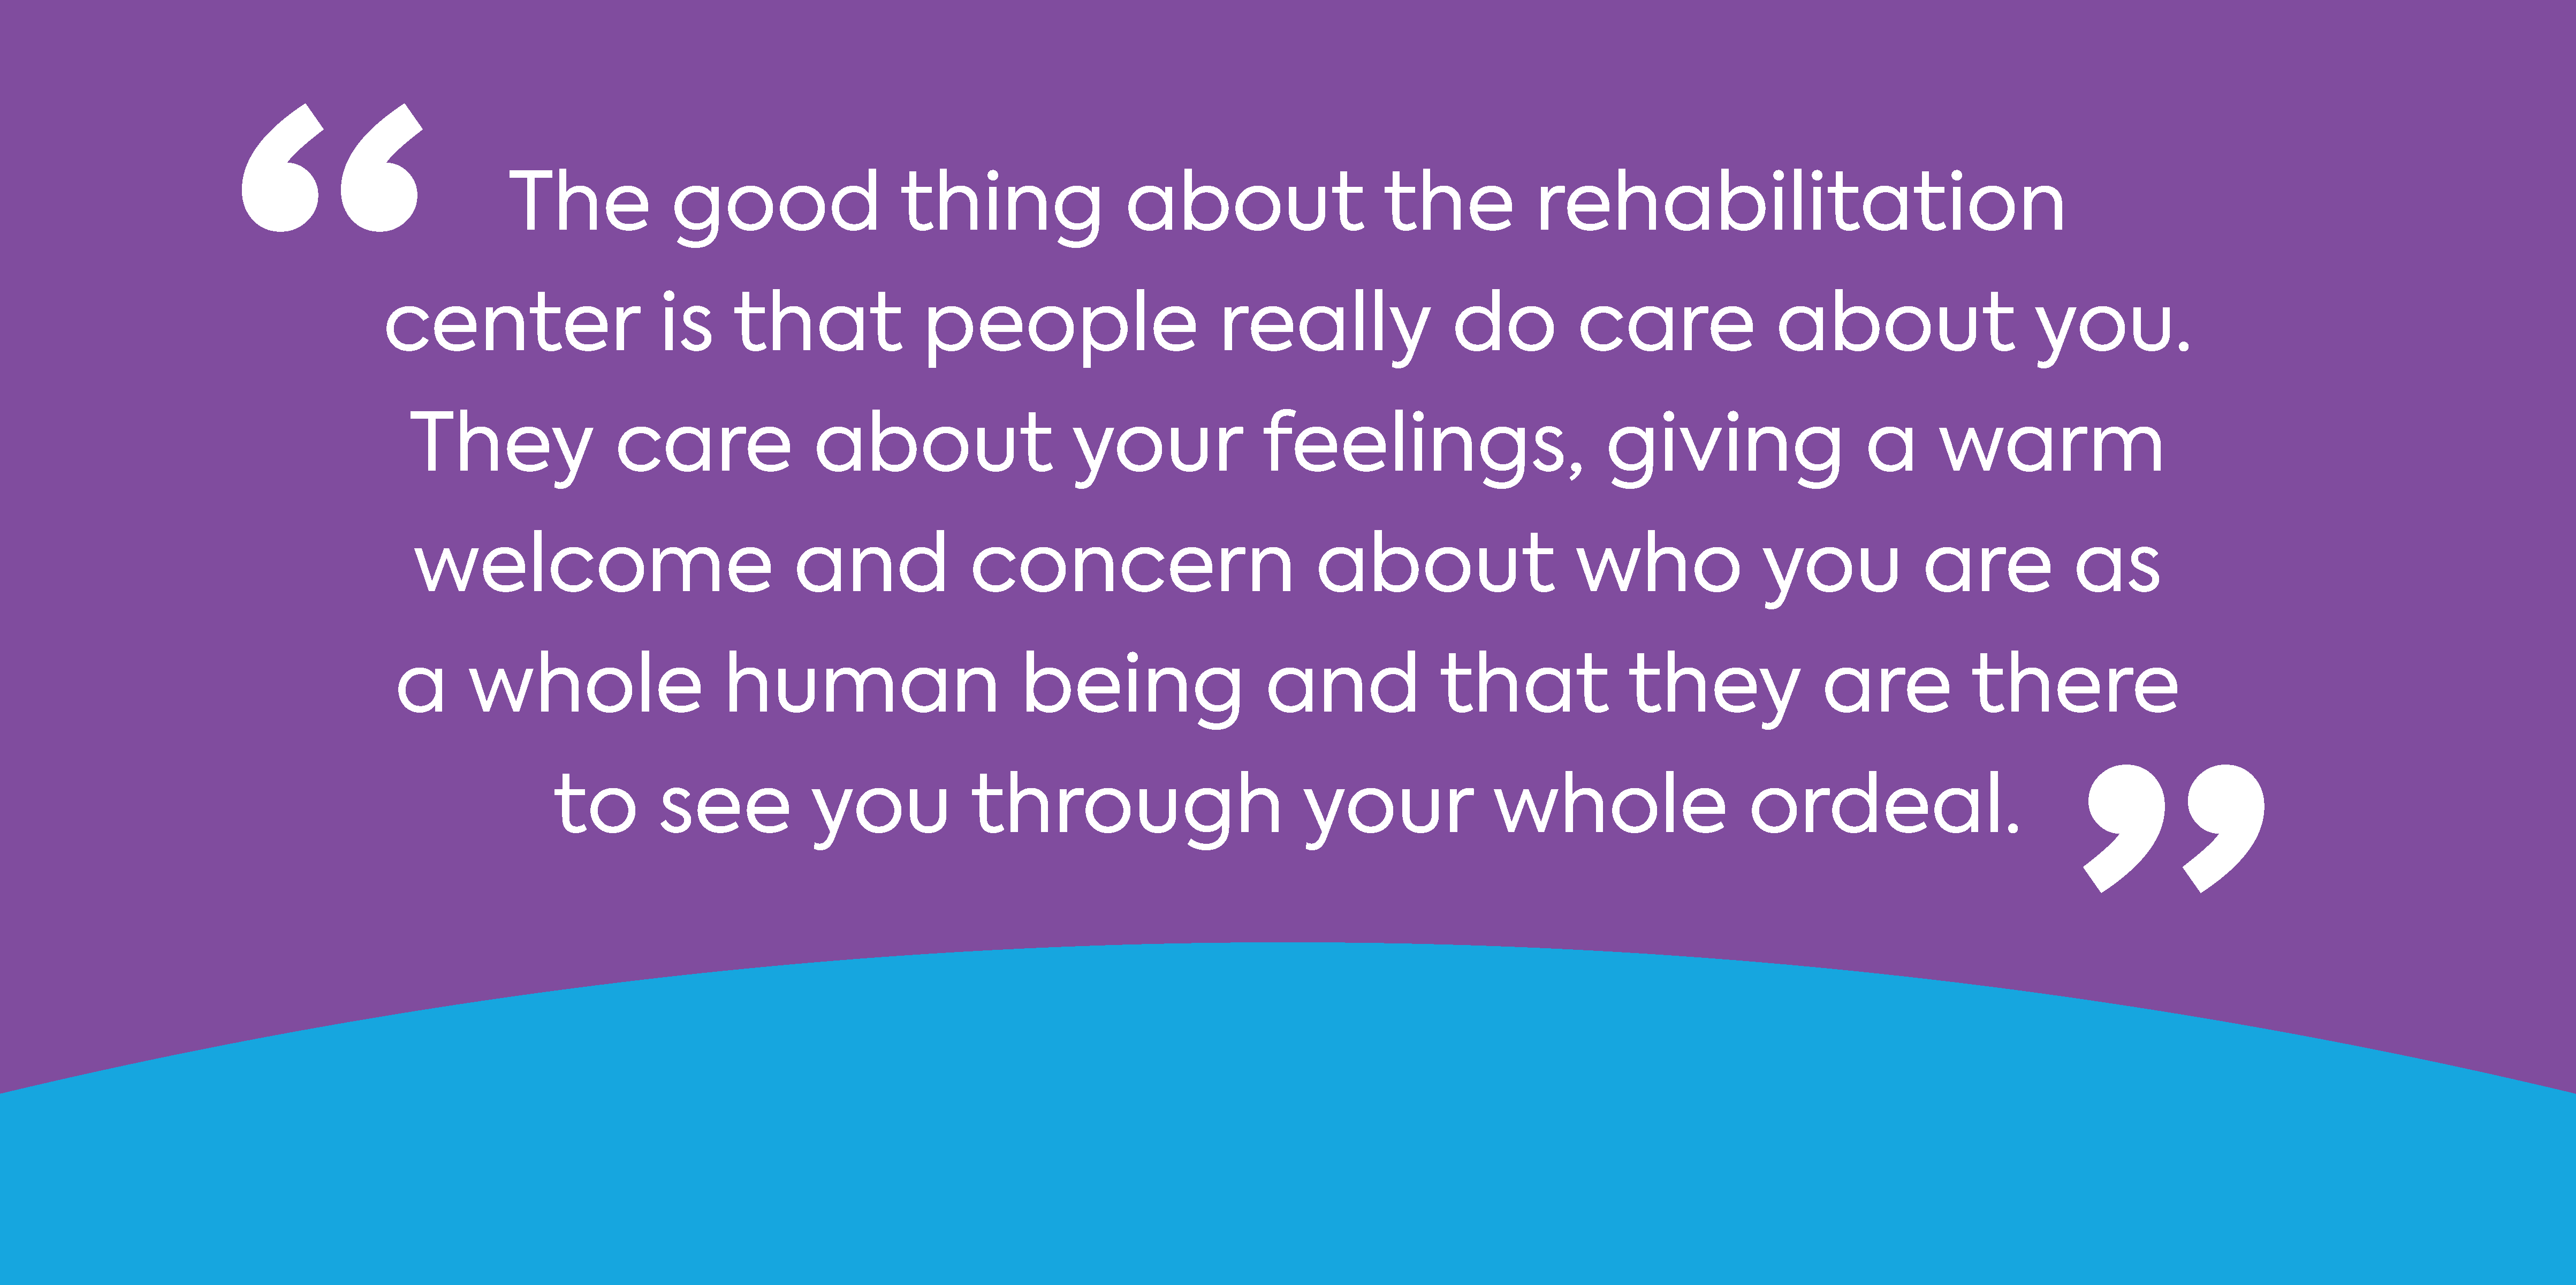 The good things about the rehabilitation center is that people really do care about you. They care about your feelings, giving warm welcome and concern about who you are as a whole human being and that they are there to see you through your whole ordeal.